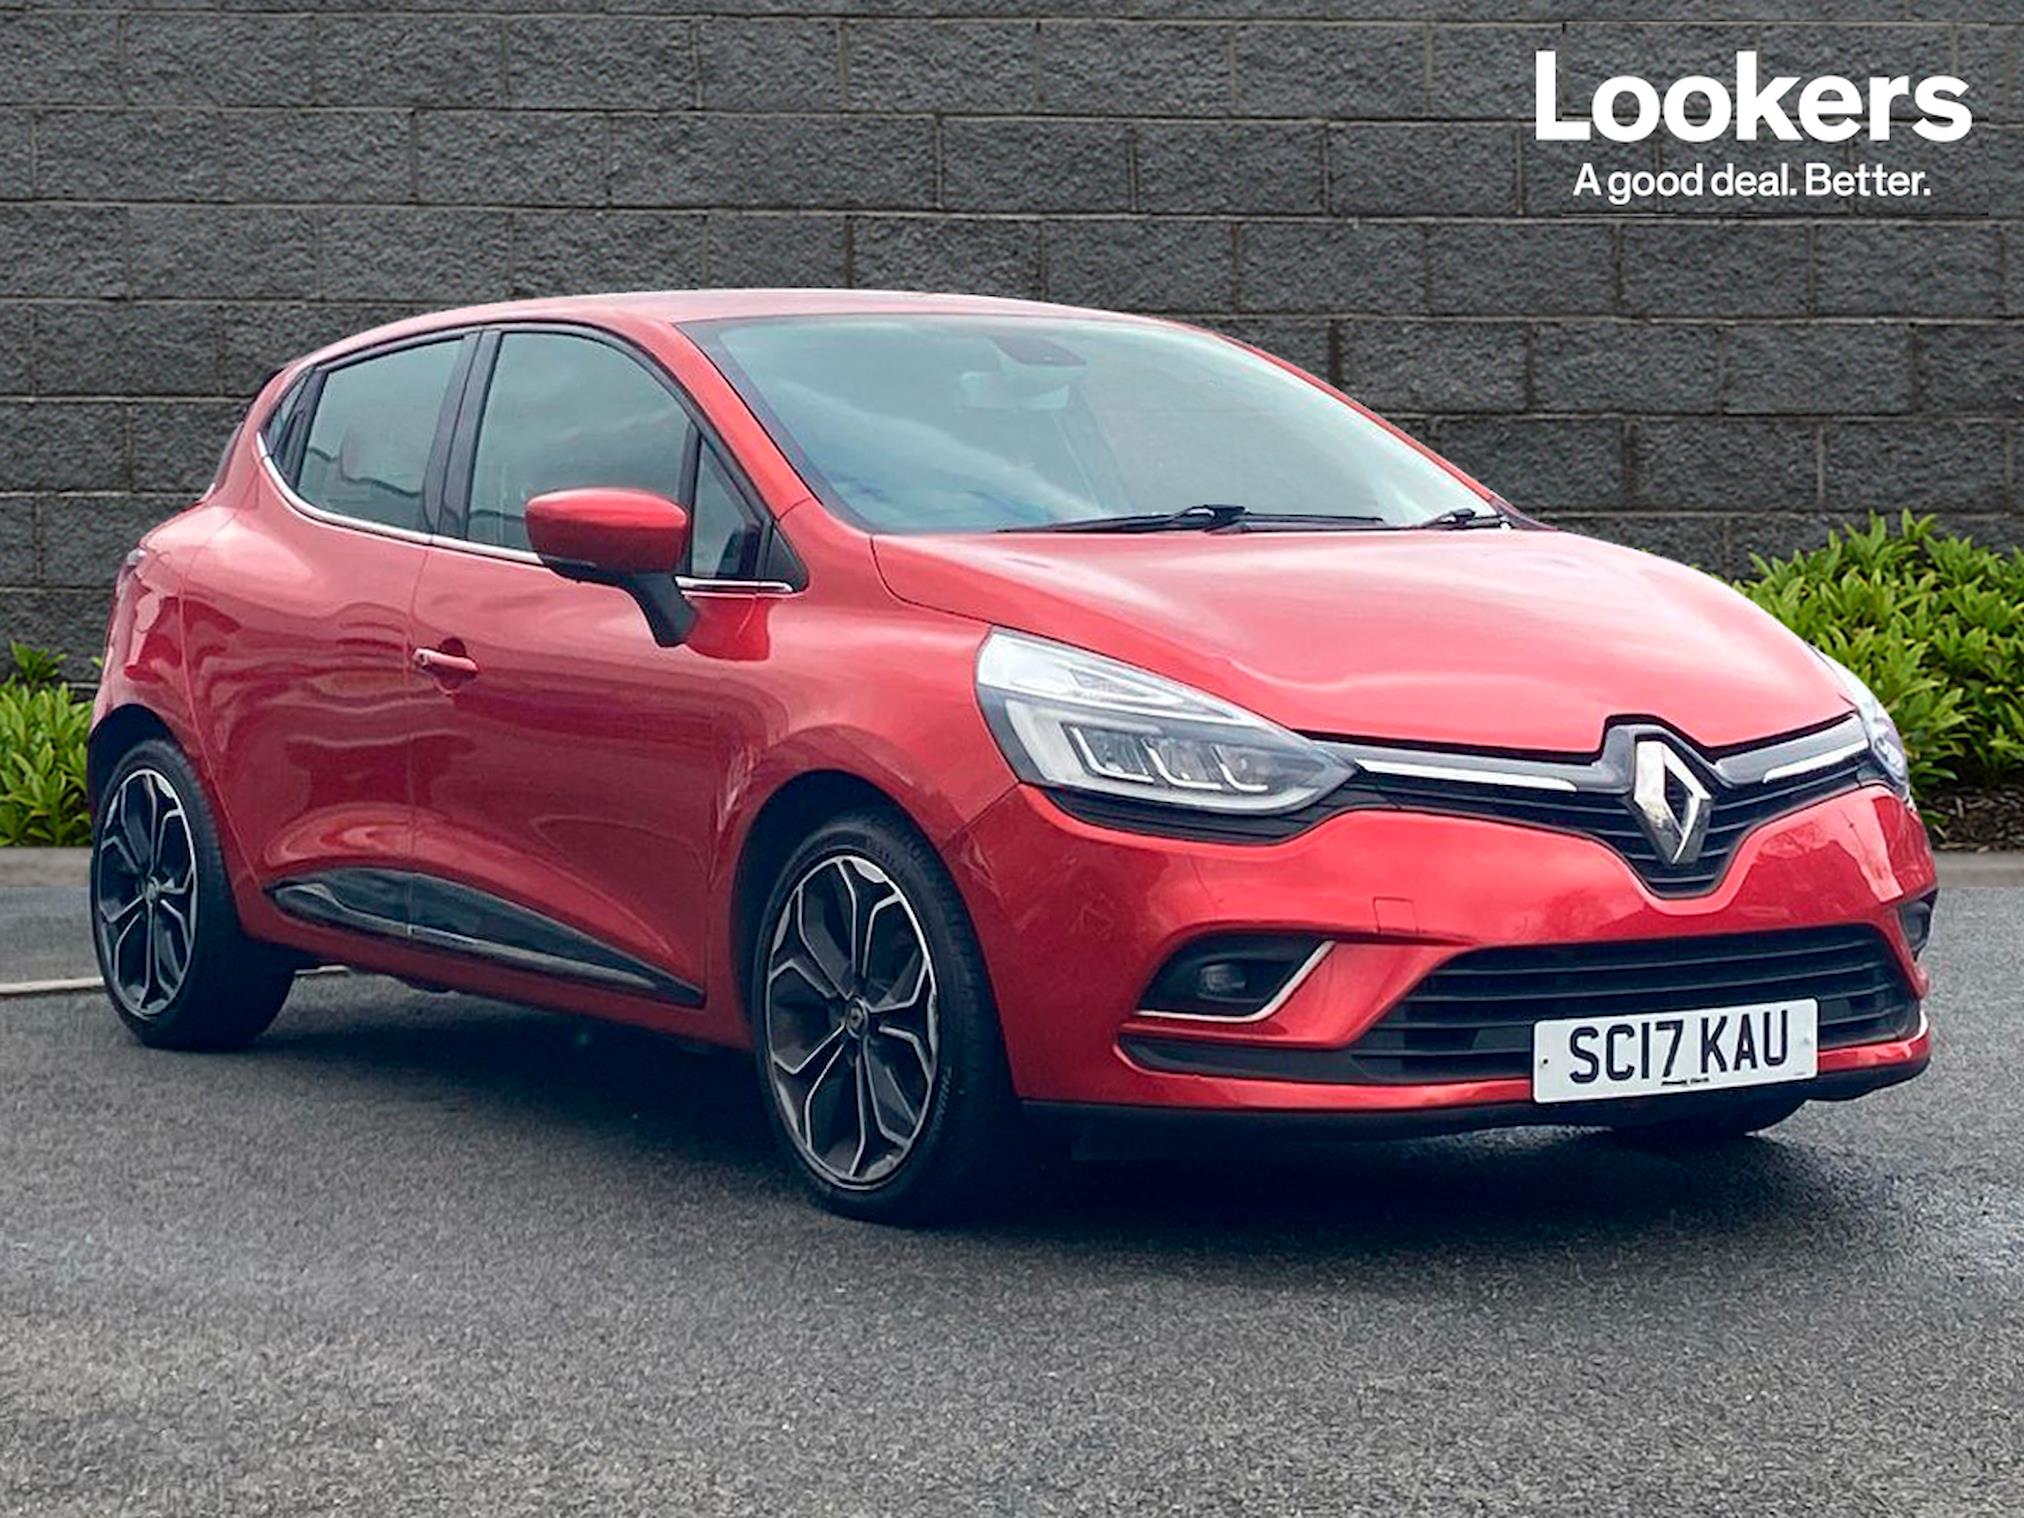 Used RENAULT CLIO 0.9 Tce 90 Dynamique S Nav 5Dr 2017